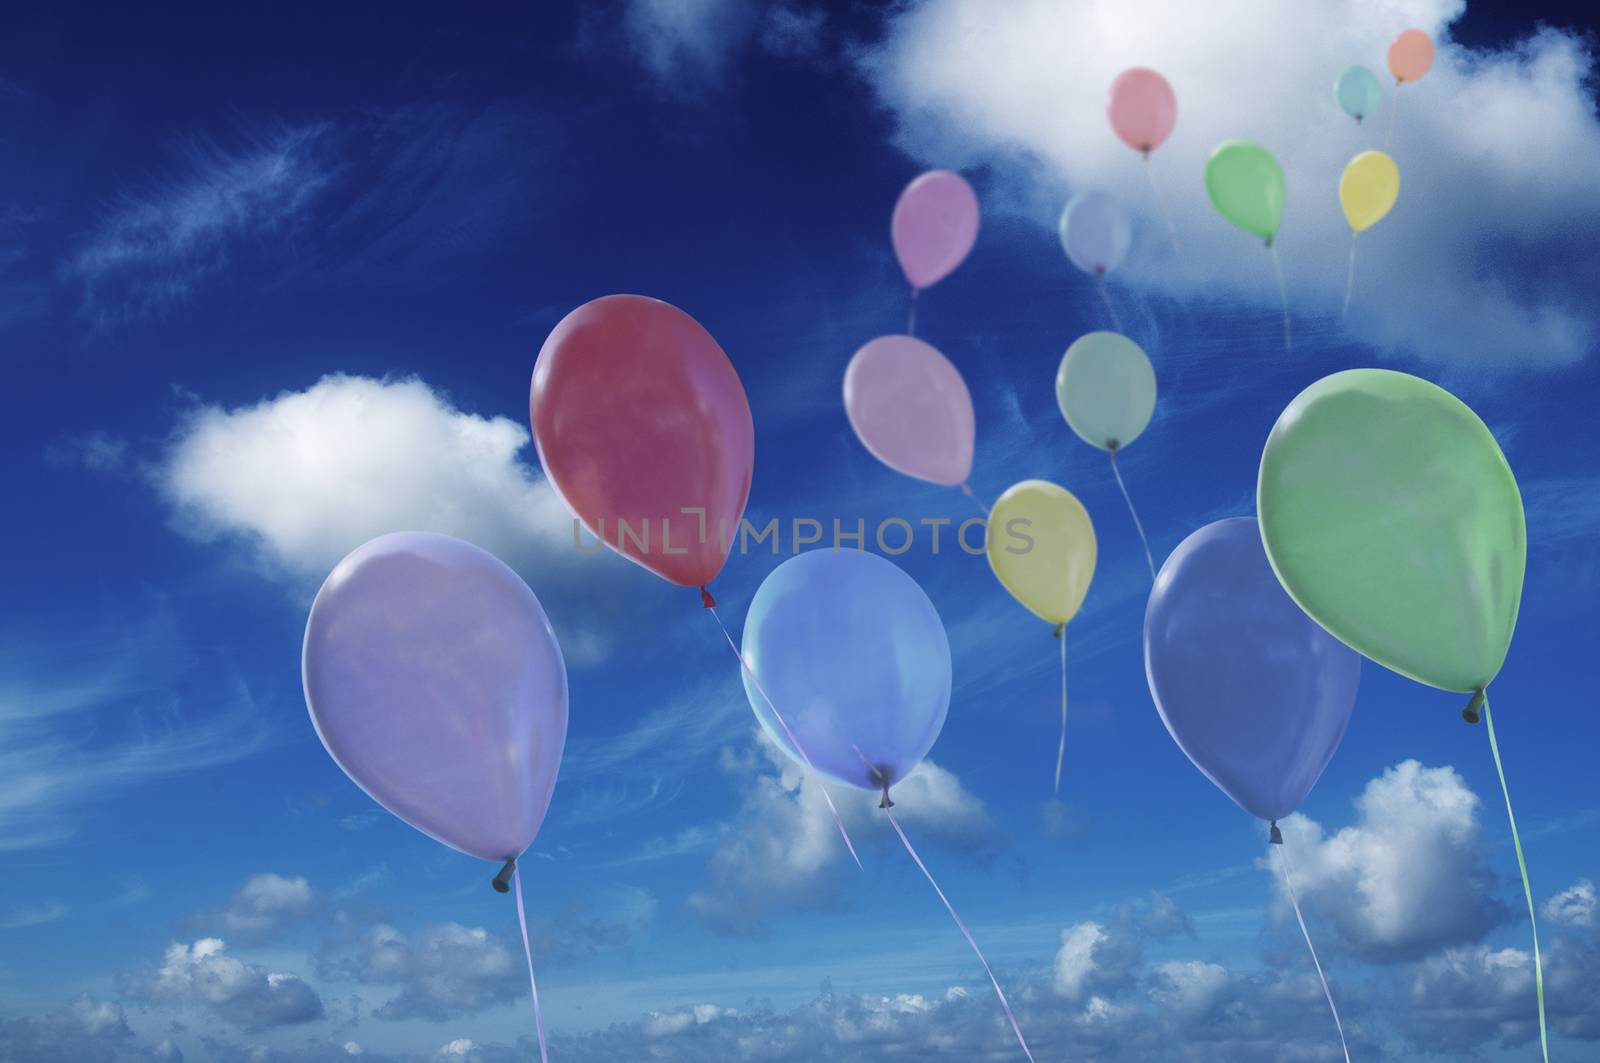 colored ballons against cloudy sky by fotoCD